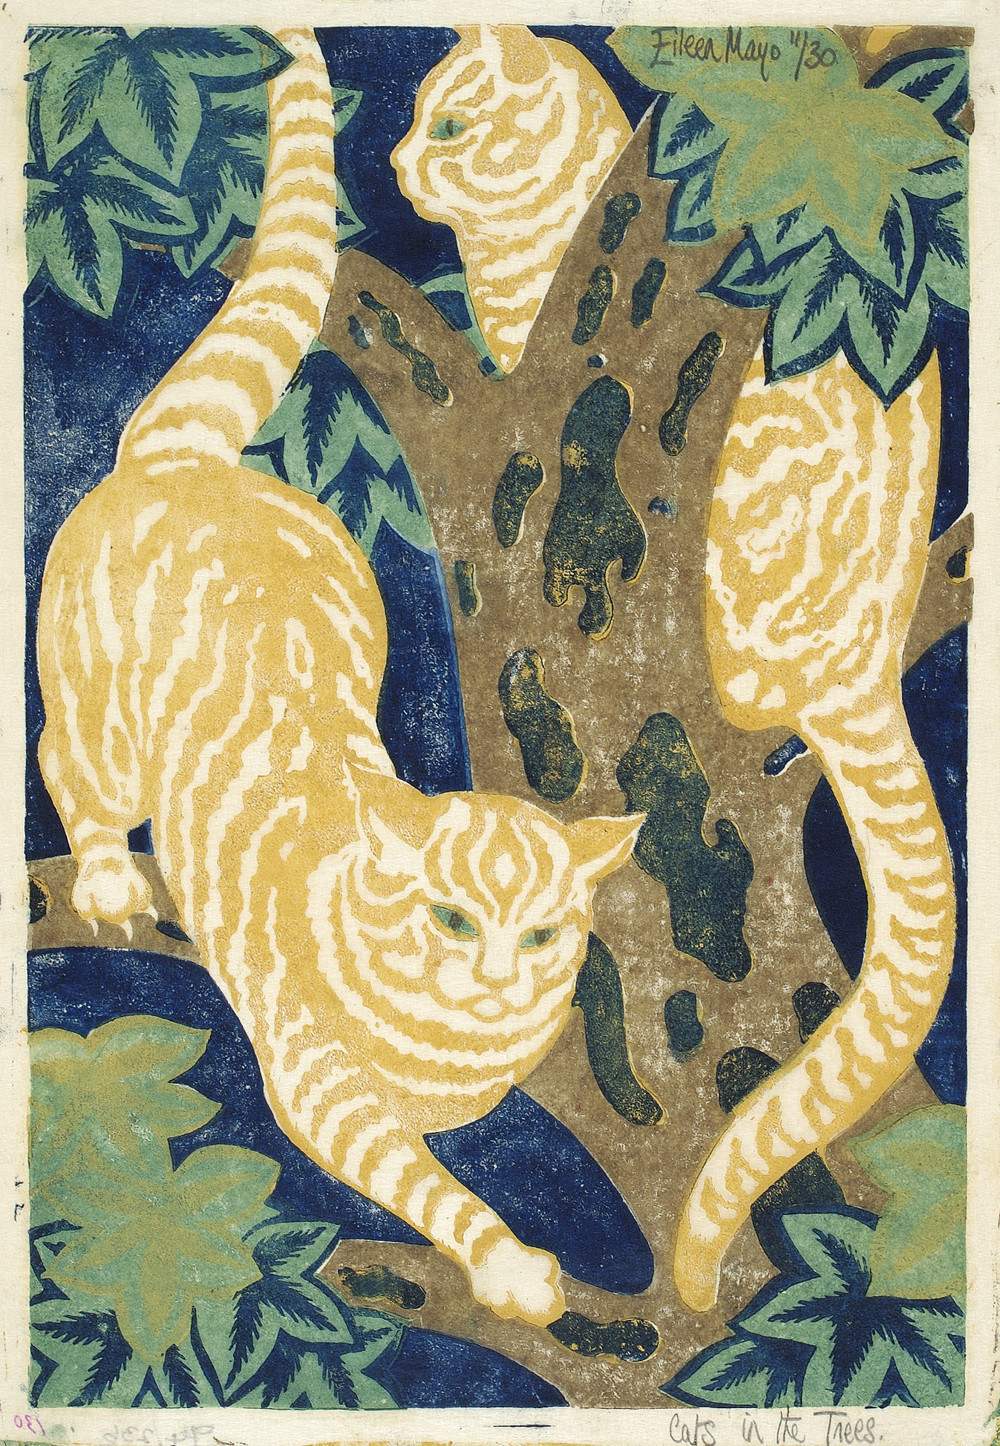 Cats in the Trees by Eileen Mayo